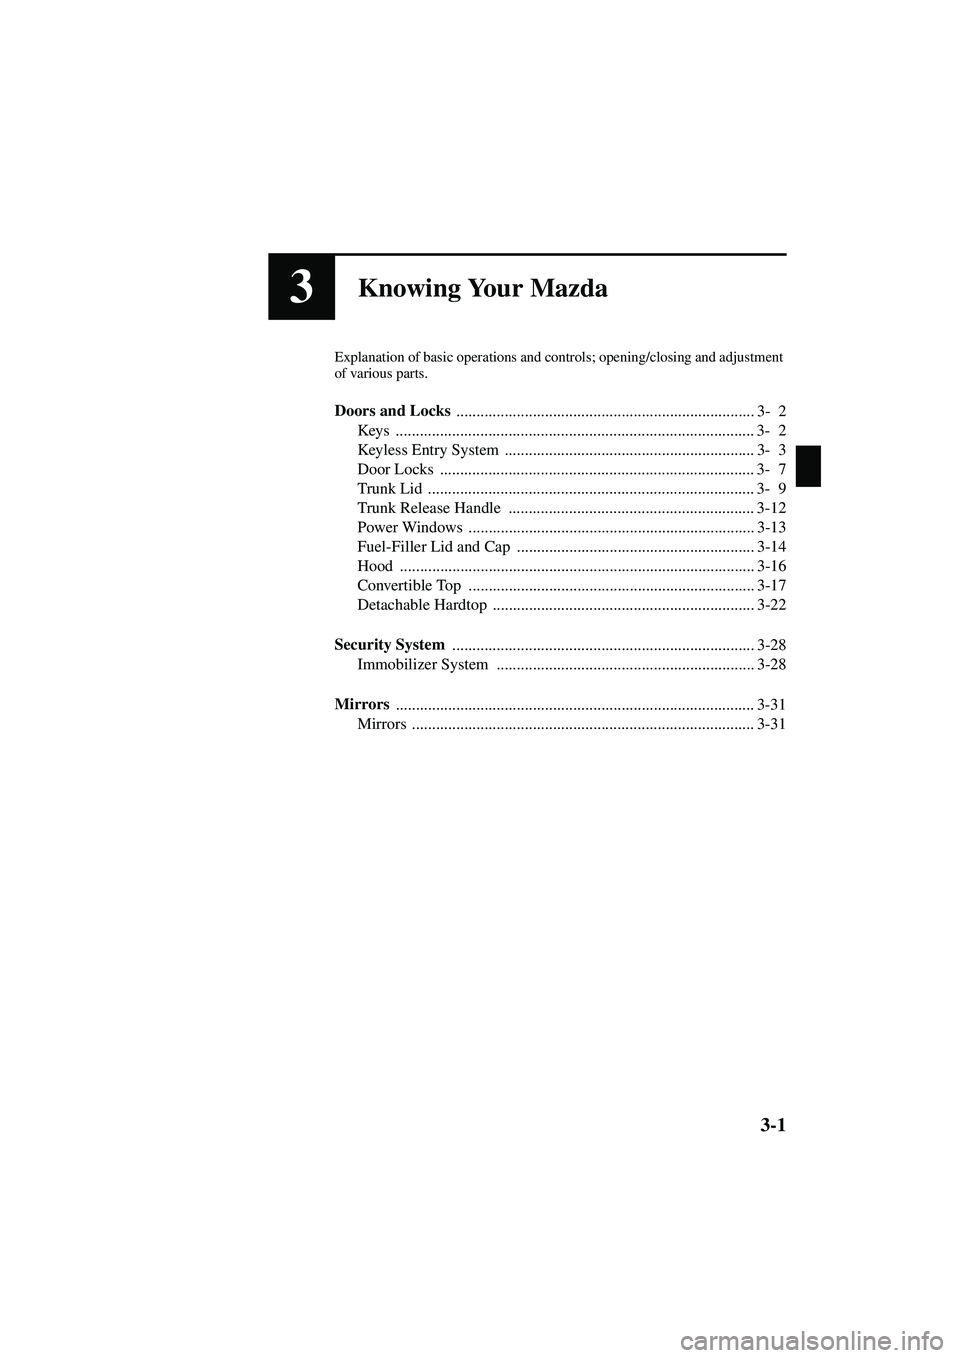 MAZDA MODEL MX-5 MIATA 2003  Owners Manual 3-1
Form No. 8R09-EA-02G
3Knowing Your Mazda
Explanation of basic operations and controls; opening/closing and adjustment 
of various parts.
Doors and Locks ...........................................